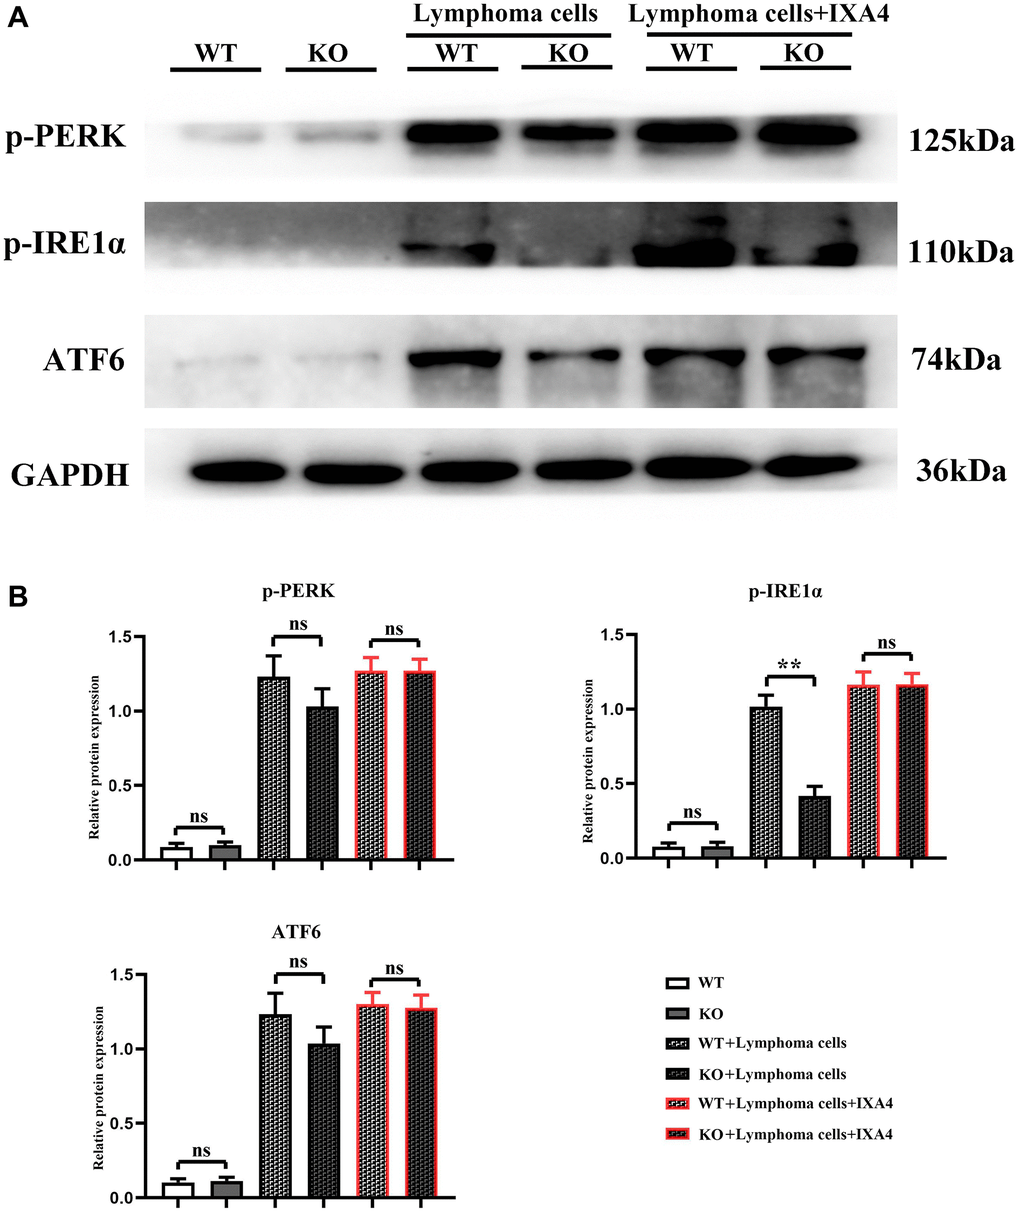 Western blotting of p-PERK, p-IRE1α and ATF6. (A) Protein bands of p-PERK, p-IRE1α and ATF6; (B) Relative protein expressions of p-PERK, p-IRE1α and ATF6. (WT group vs. KO group; WT + lymphoma cell group vs. KO + lymphoma cell group; WT + lymphoma cell + IXA4 group vs. KO + lymphoma cell + IXA4 group; **P nsP > 0.05; N = 3).